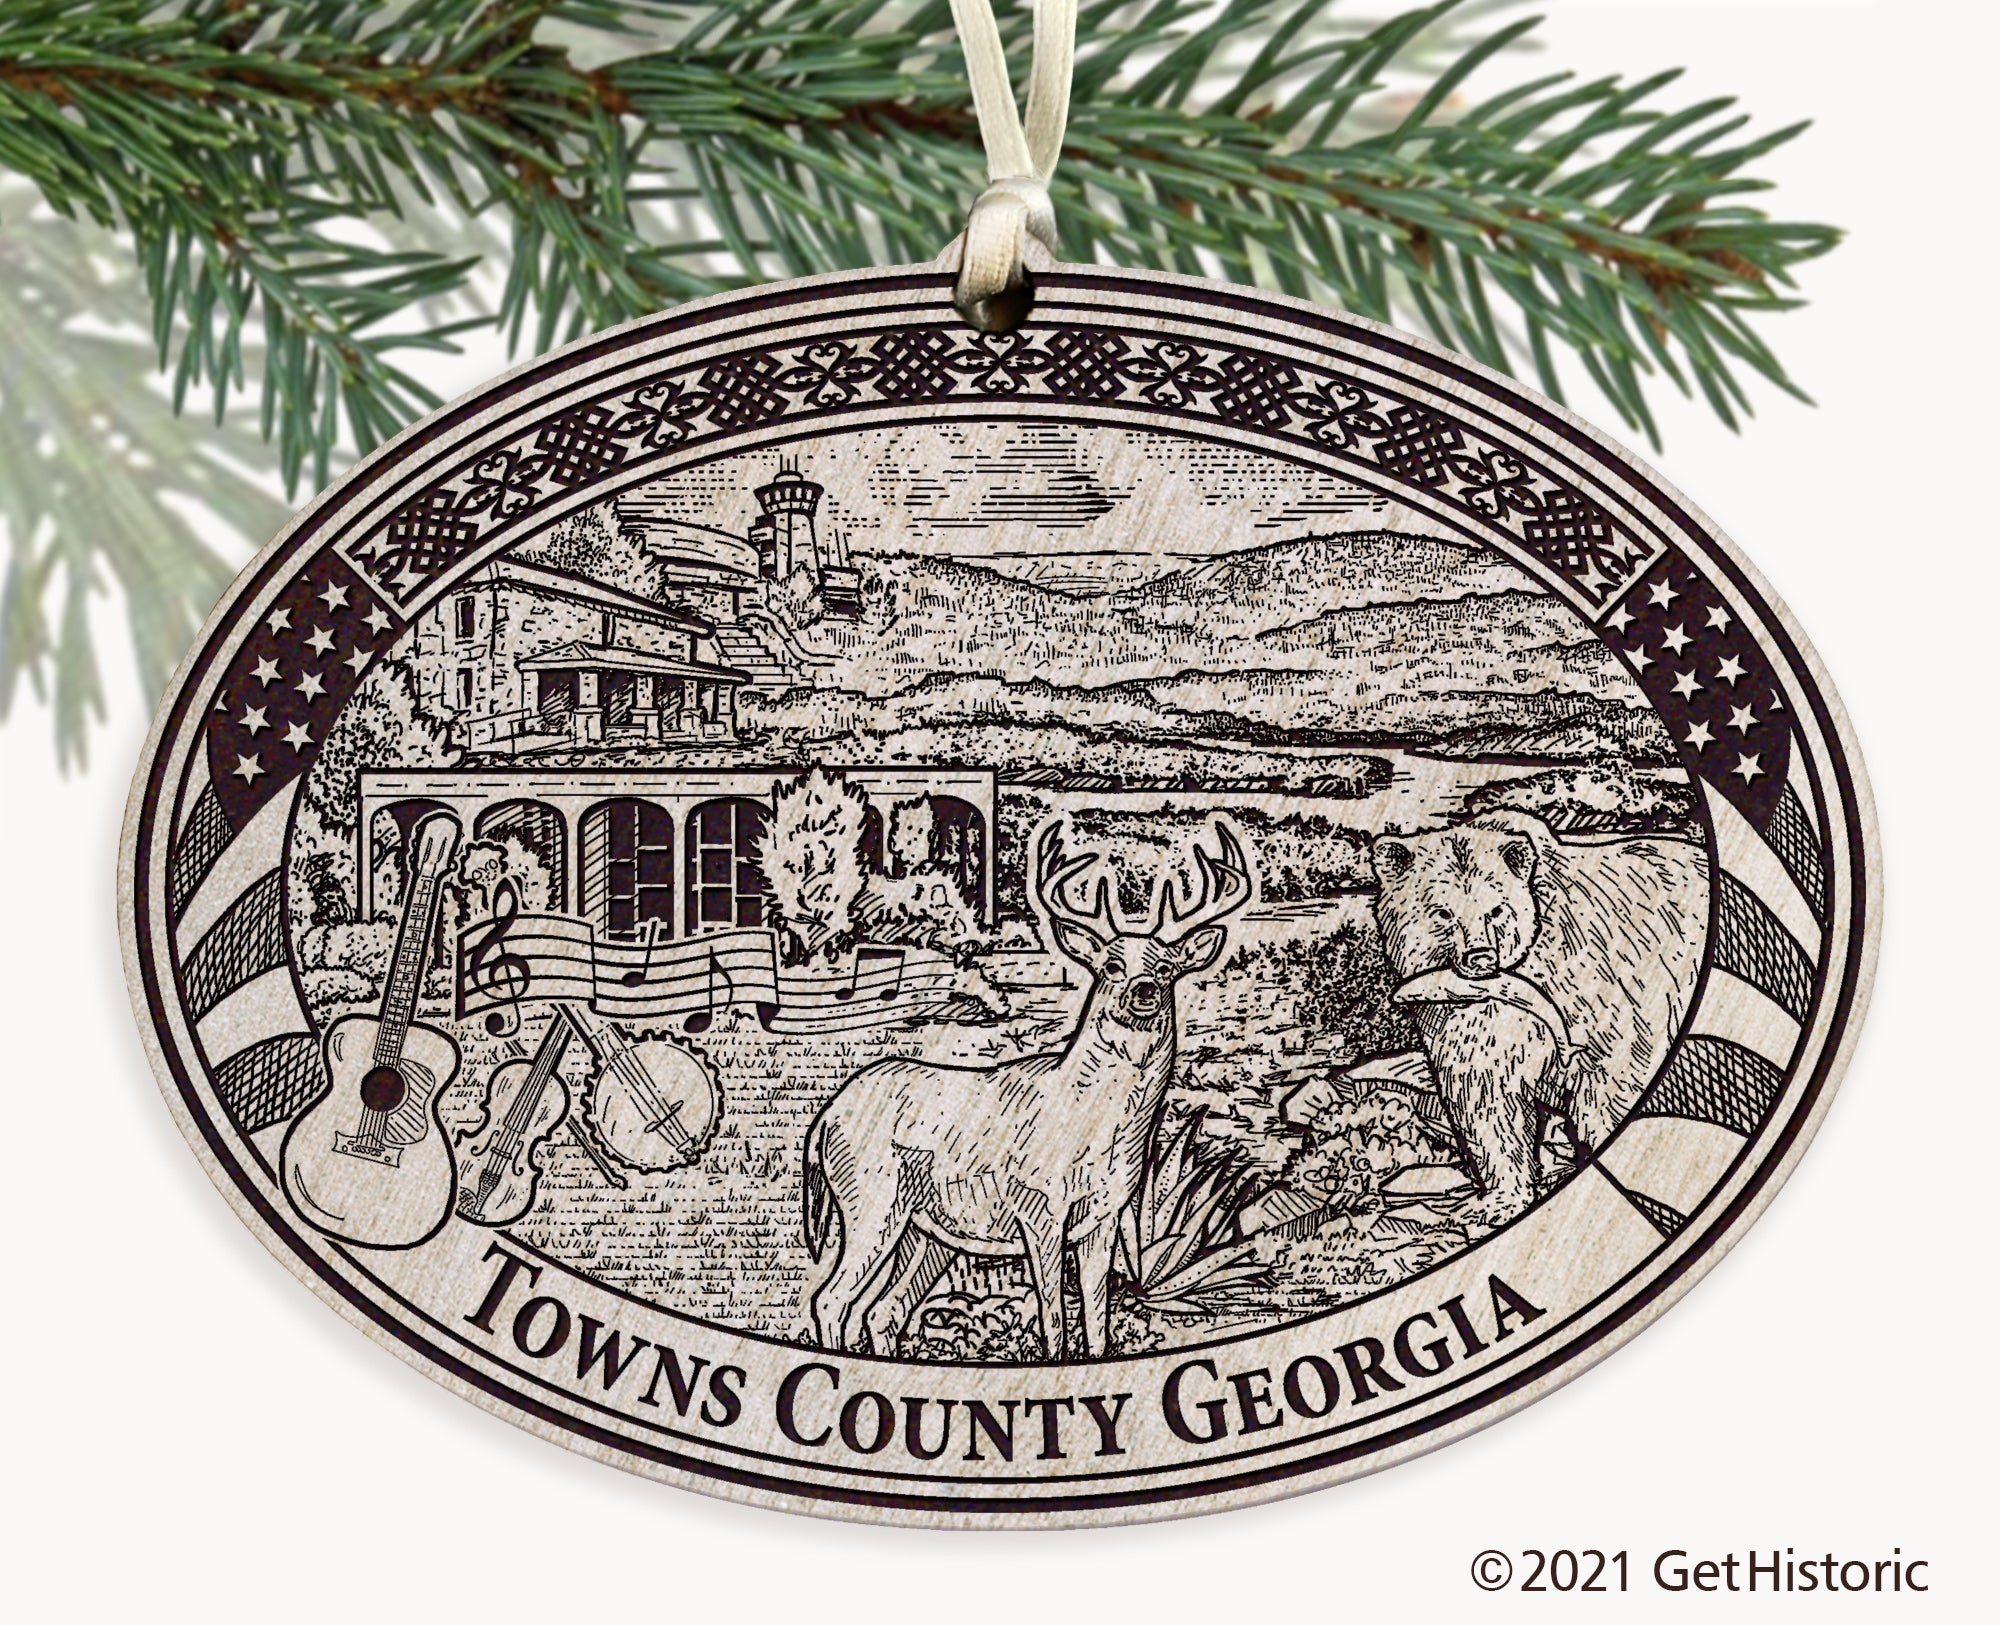 Towns County Georgia Engraved Ornament